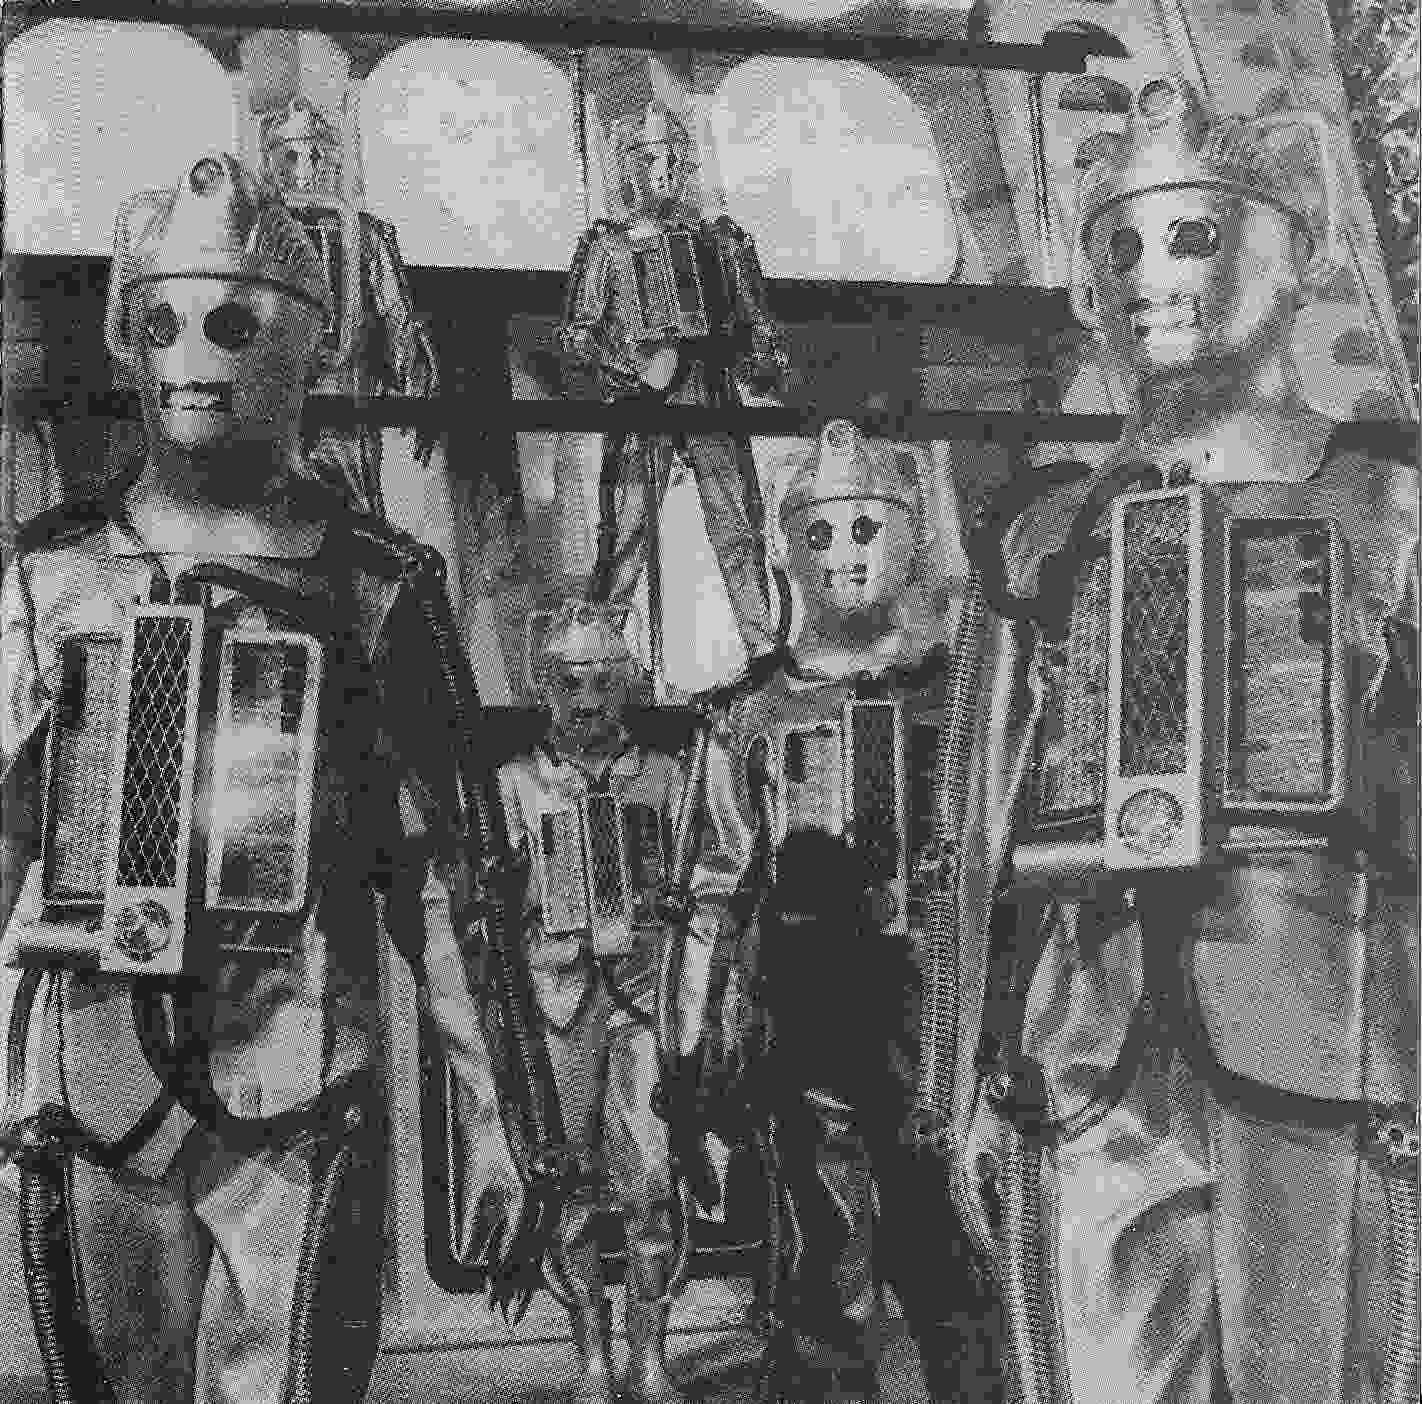 Picture of Music from the tomb of the Cybermen by artist Ron Grainer and the BBC Radiophonic Workshop / Dick Mills from the BBC cds - Records and Tapes library